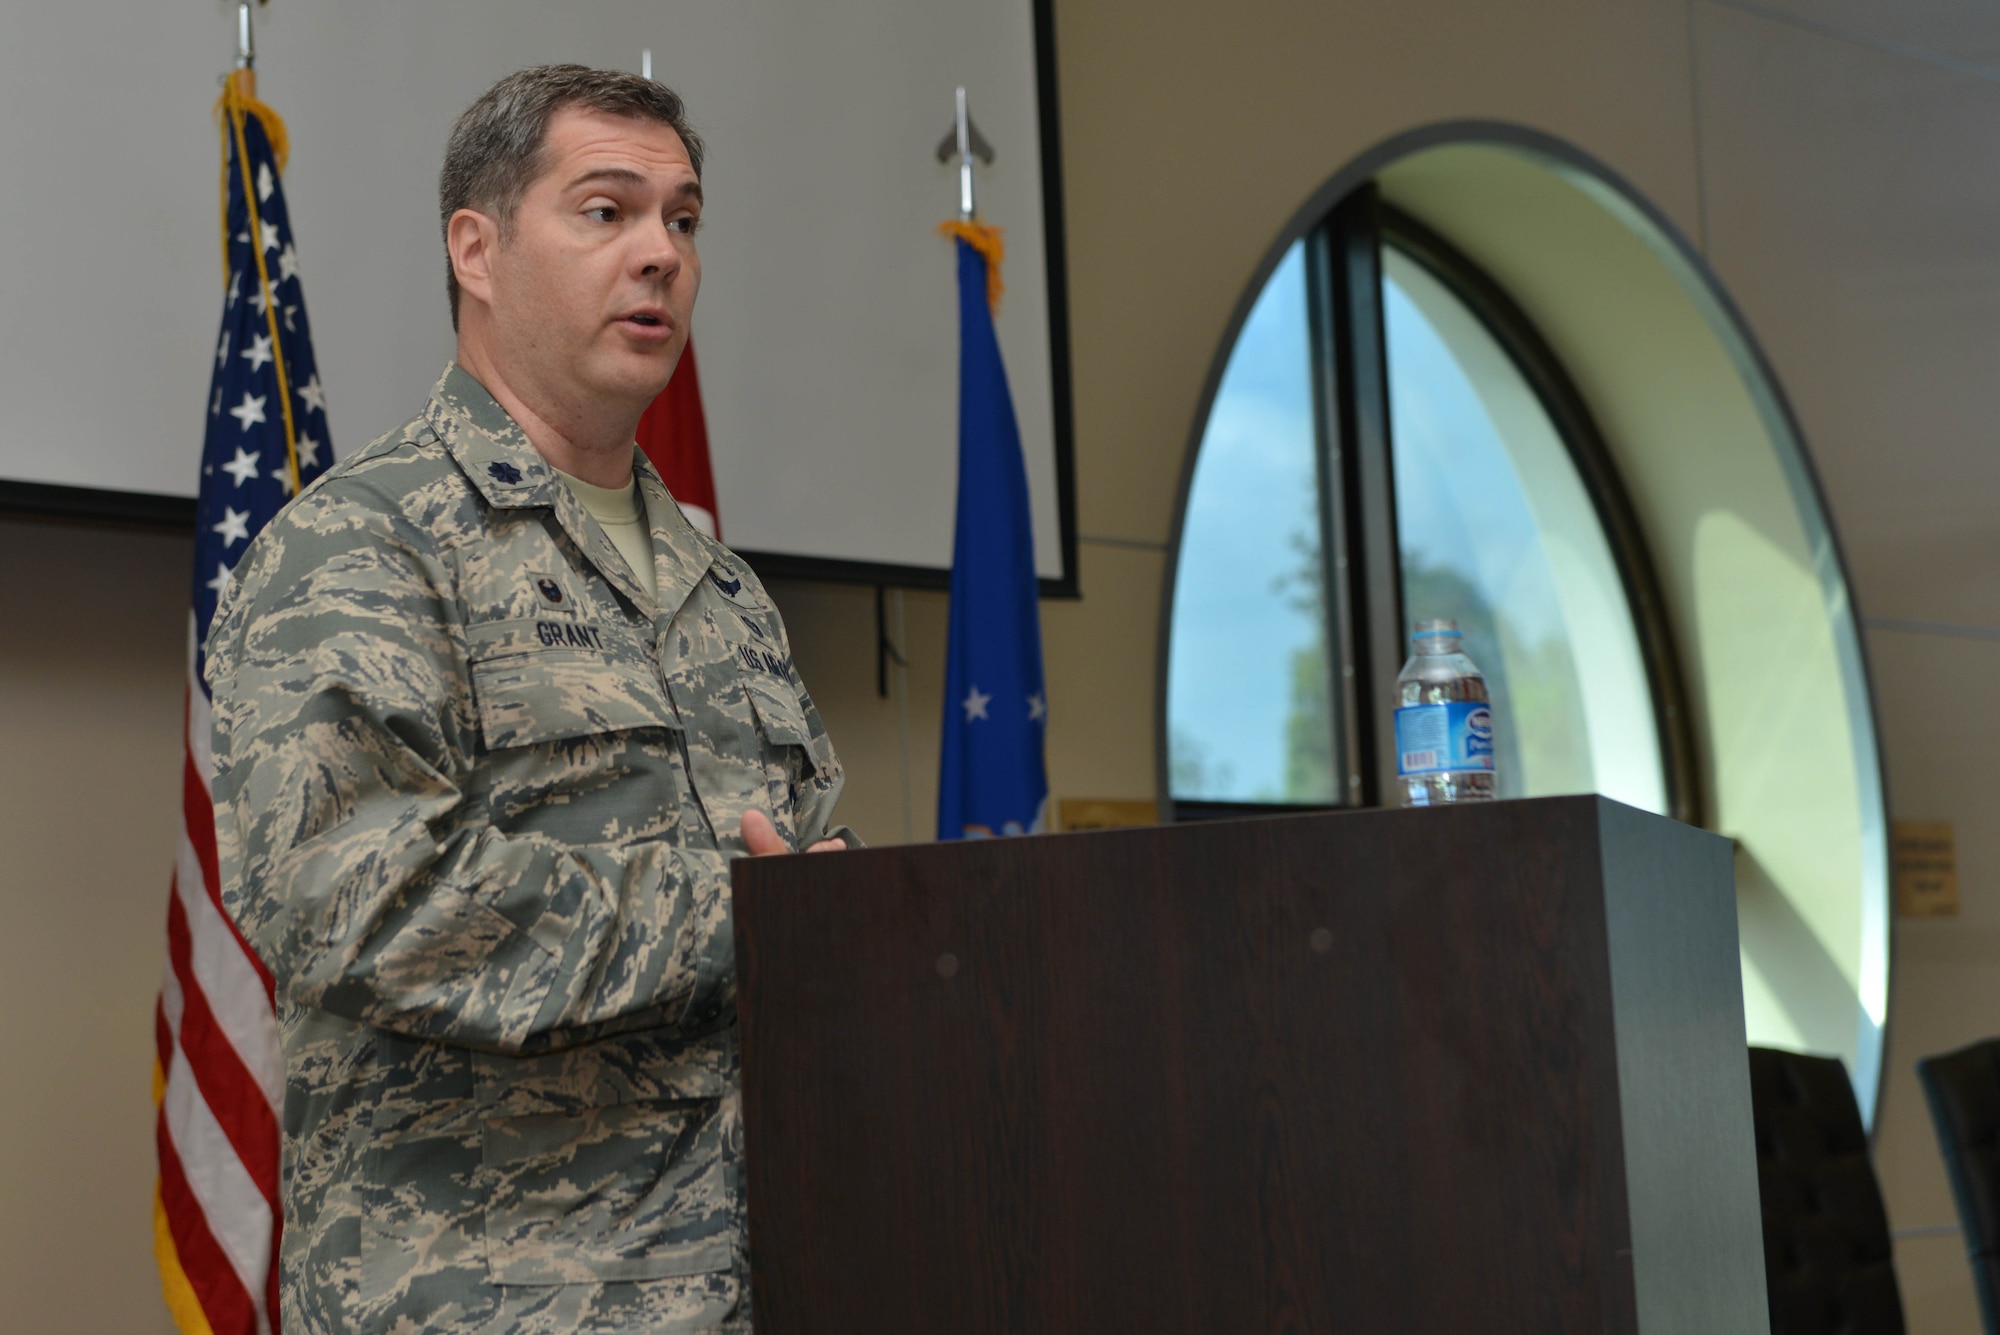 U.S. Air Force Lt. Col. Robert Grant, 39th Operations Support Squadron incoming commander, speaks during a change of command ceremony June 16, 2016, at Incirlik Air Base, Turkey. Prior to taking command, Grant served as the chief of the commander’s action group, 3rd Air Force and 17th Expeditionary Air Force, Ramstein Air Base, Germany. (U.S. Air Force photo by Senior Airman John Nieves Camacho/Released)